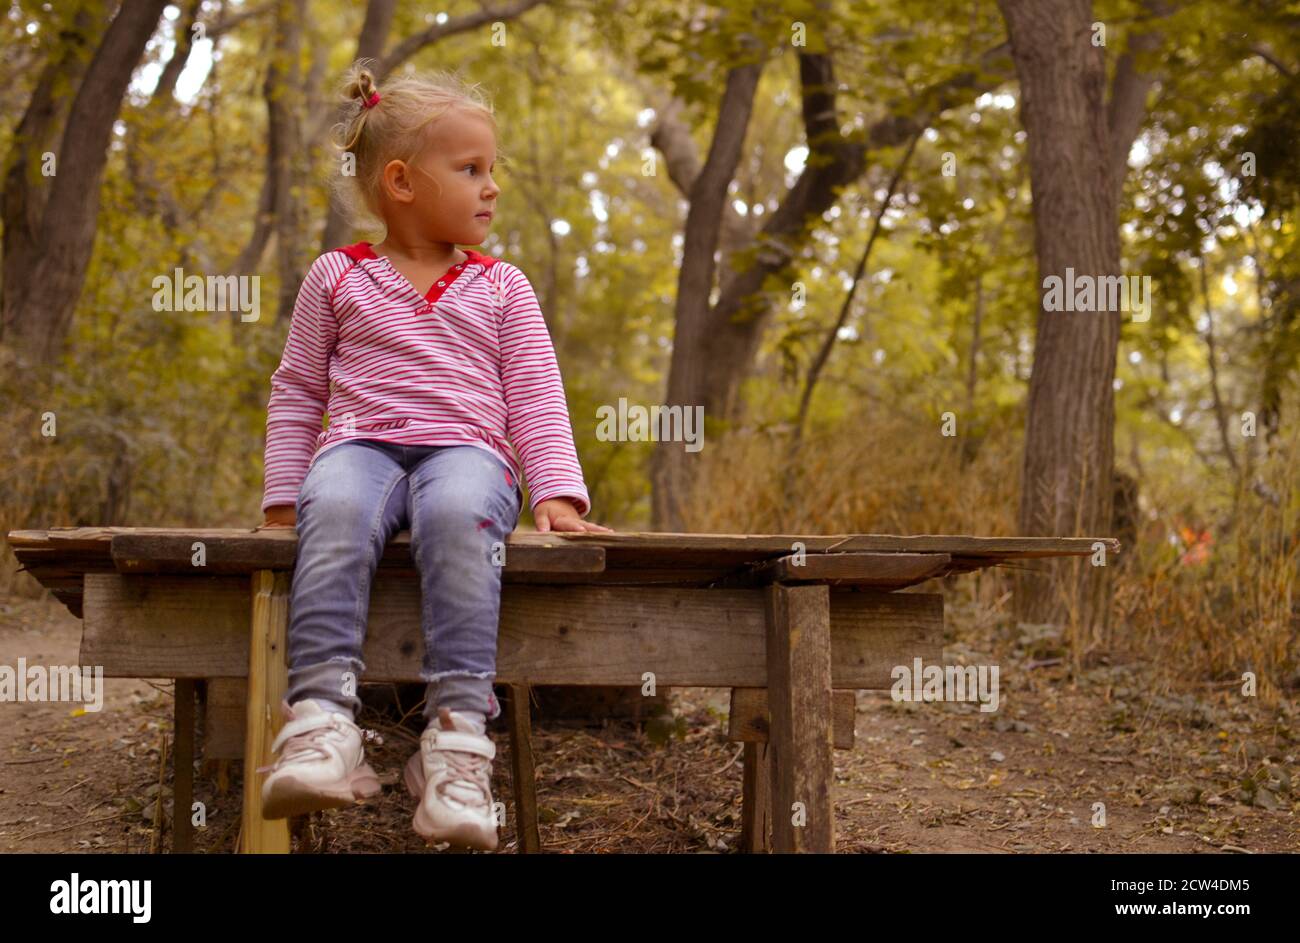 The baby sits alone on a wooden bridge in an autumn park, outdoors. Autumn portrait of a beautiful child. Moments of childhood. Stock Photo